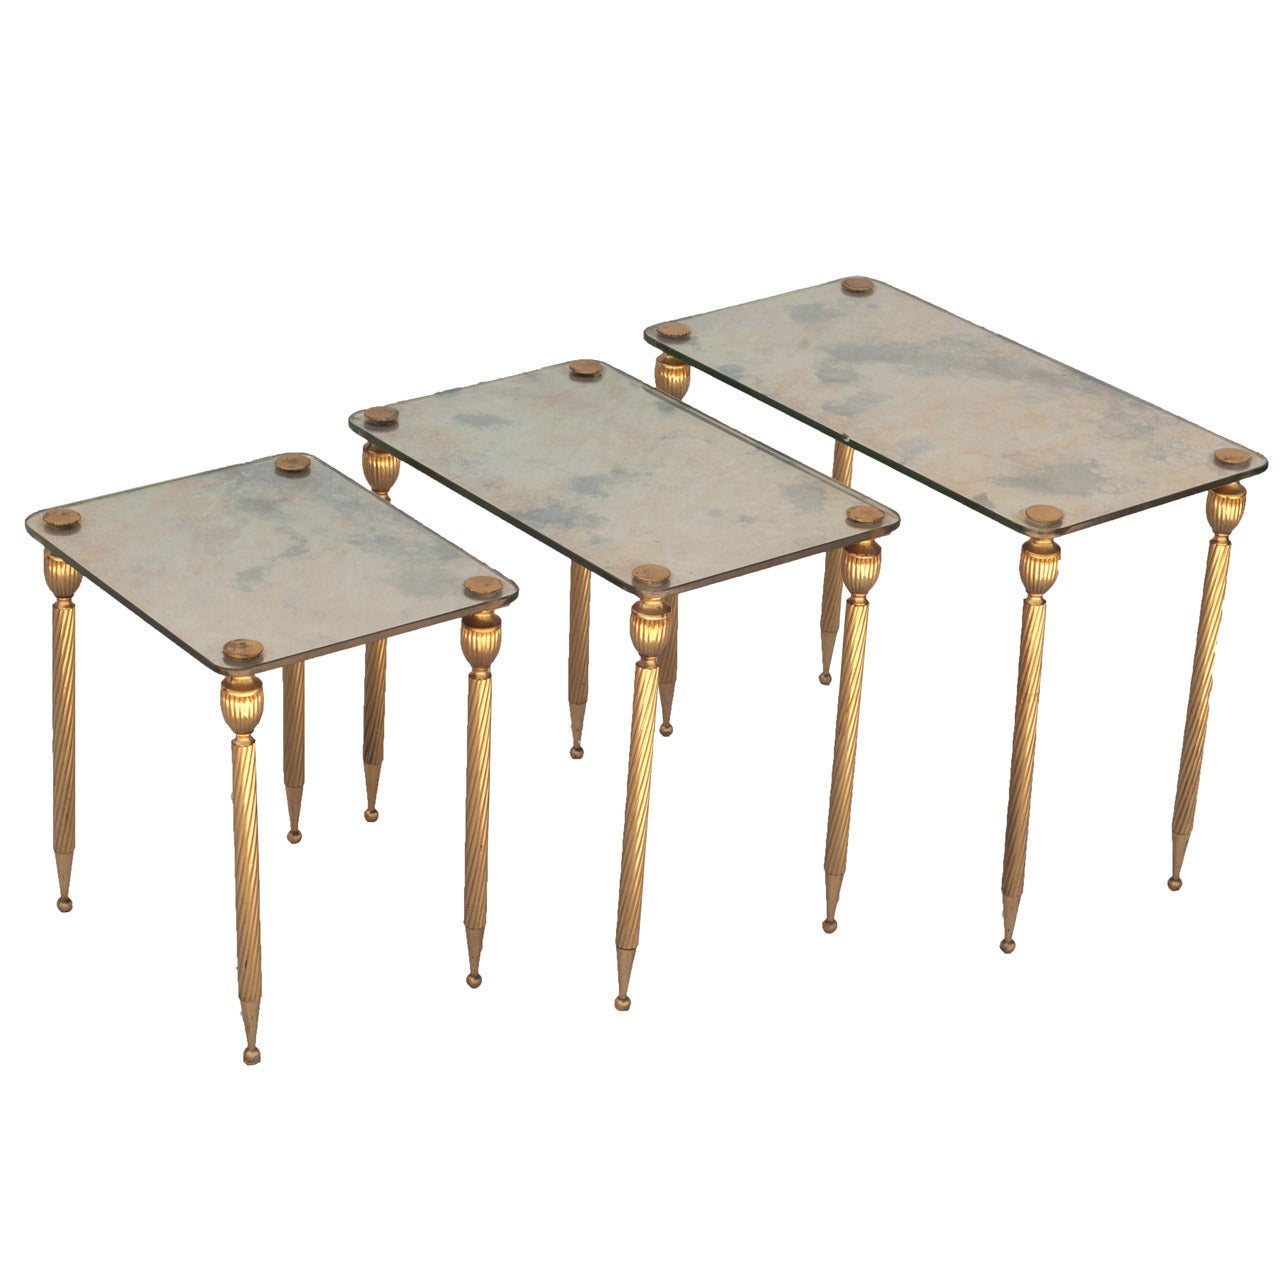 A Set of Three Brass Side Tables with Mirror Tops